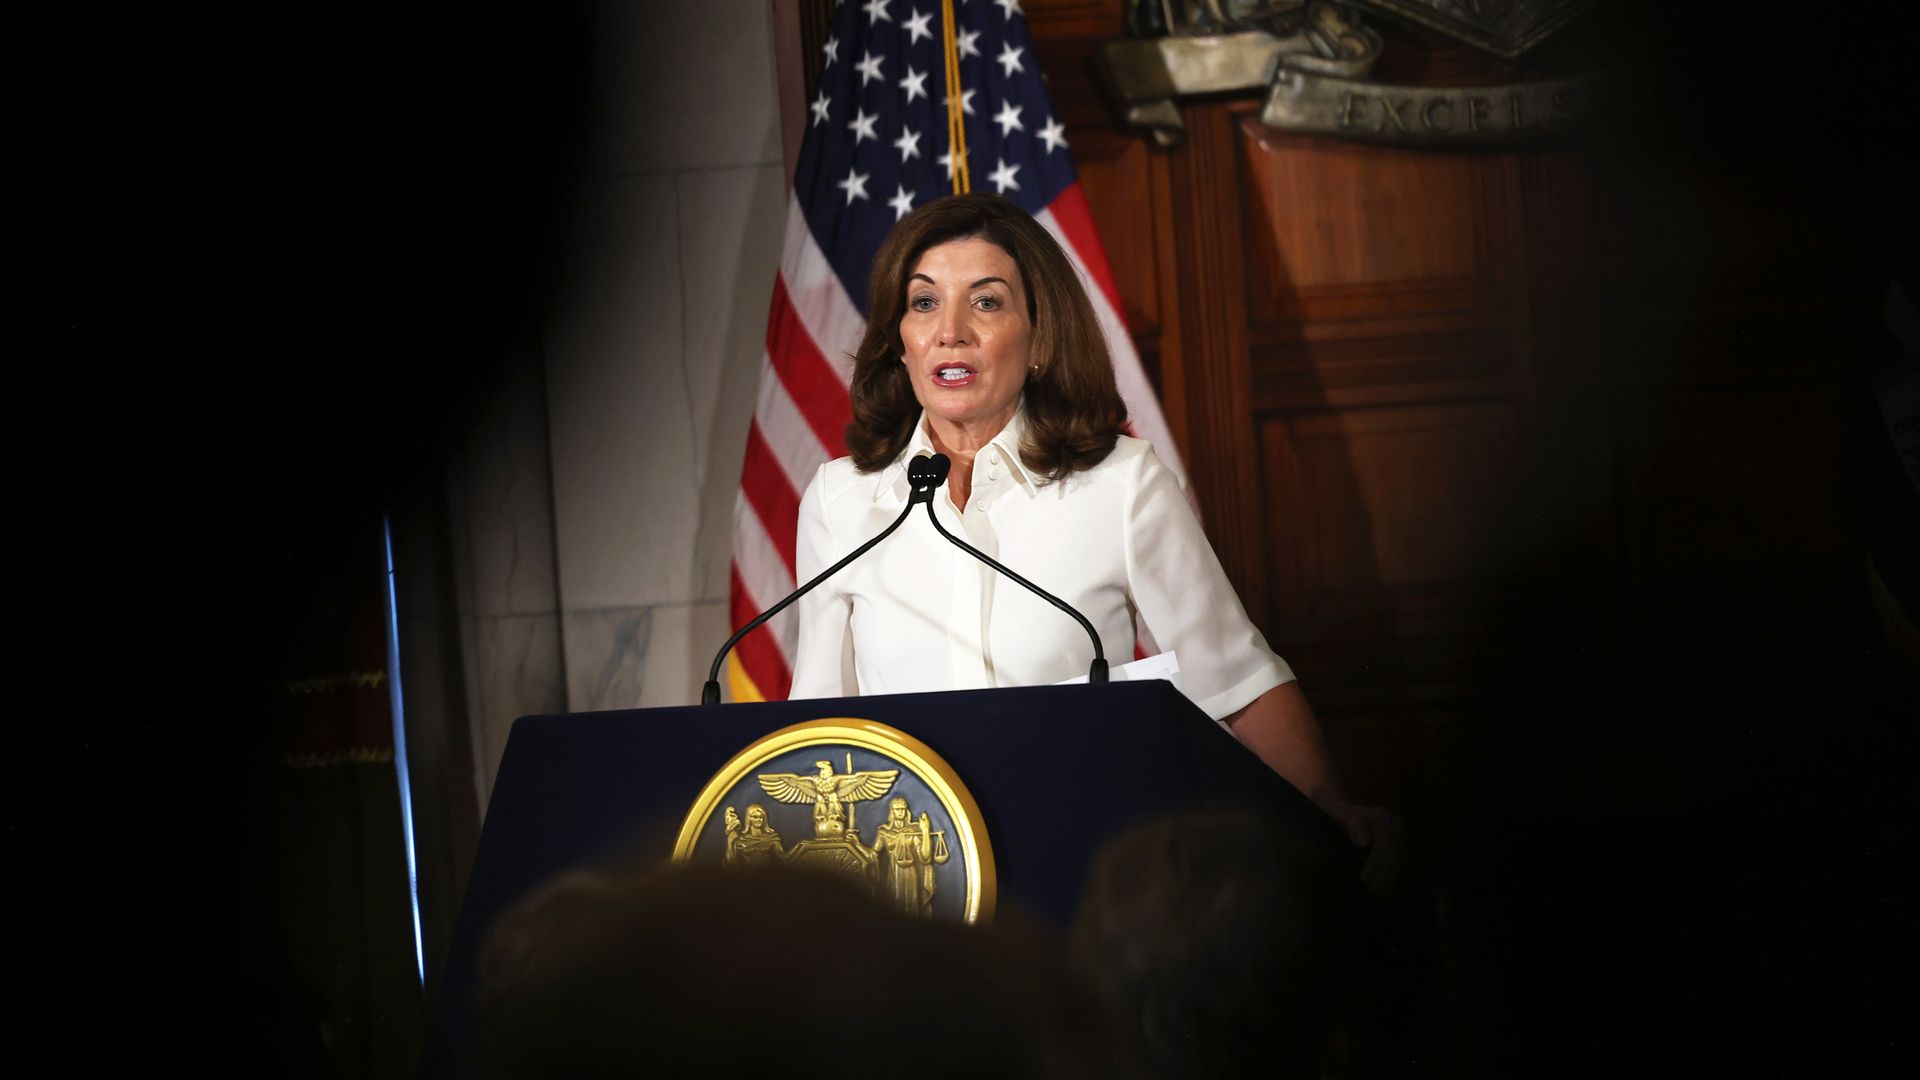 New York Gov. Kathy Hochul speaks after taking her ceremonial oath of office at the New York State Capitol on August 24, 2021 in Albany, New York